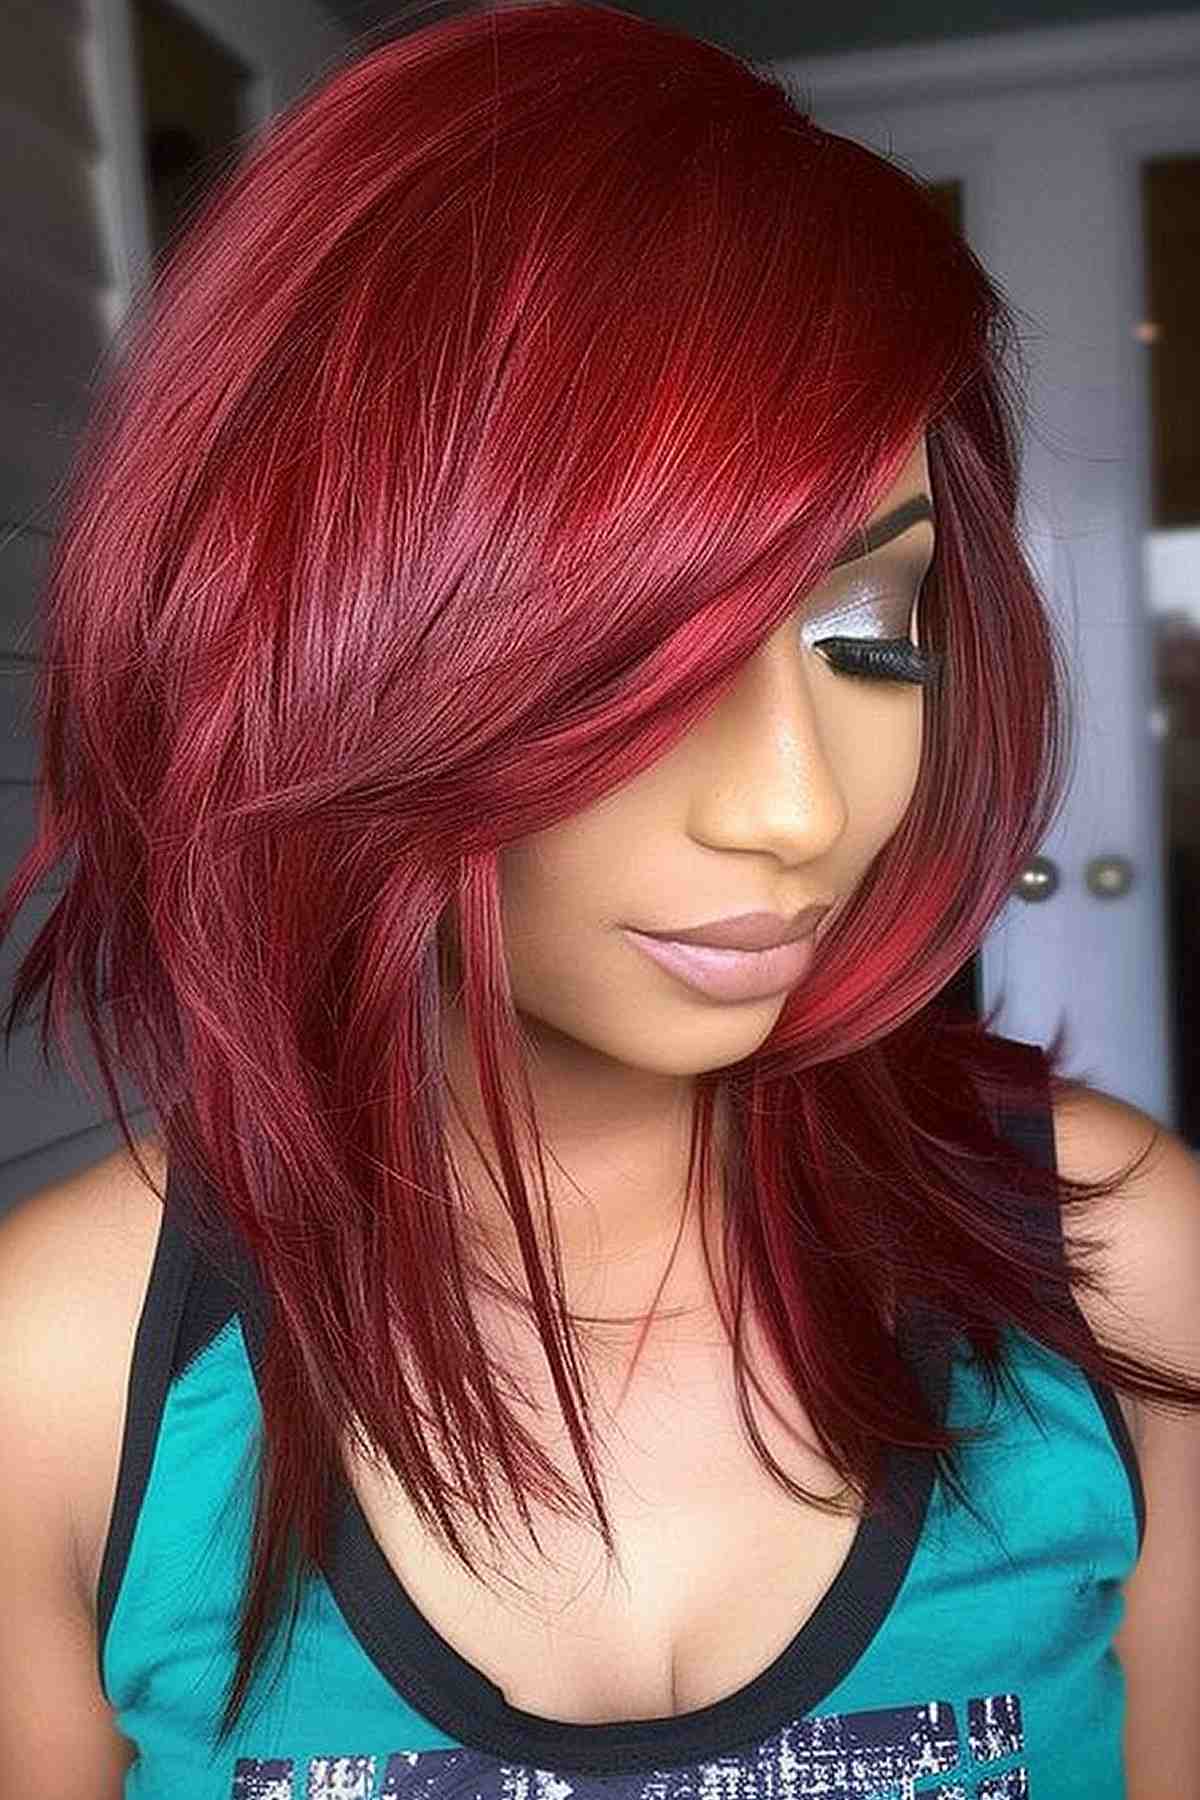 Medium-density cherry red hair with feathered bangs, framing the face.